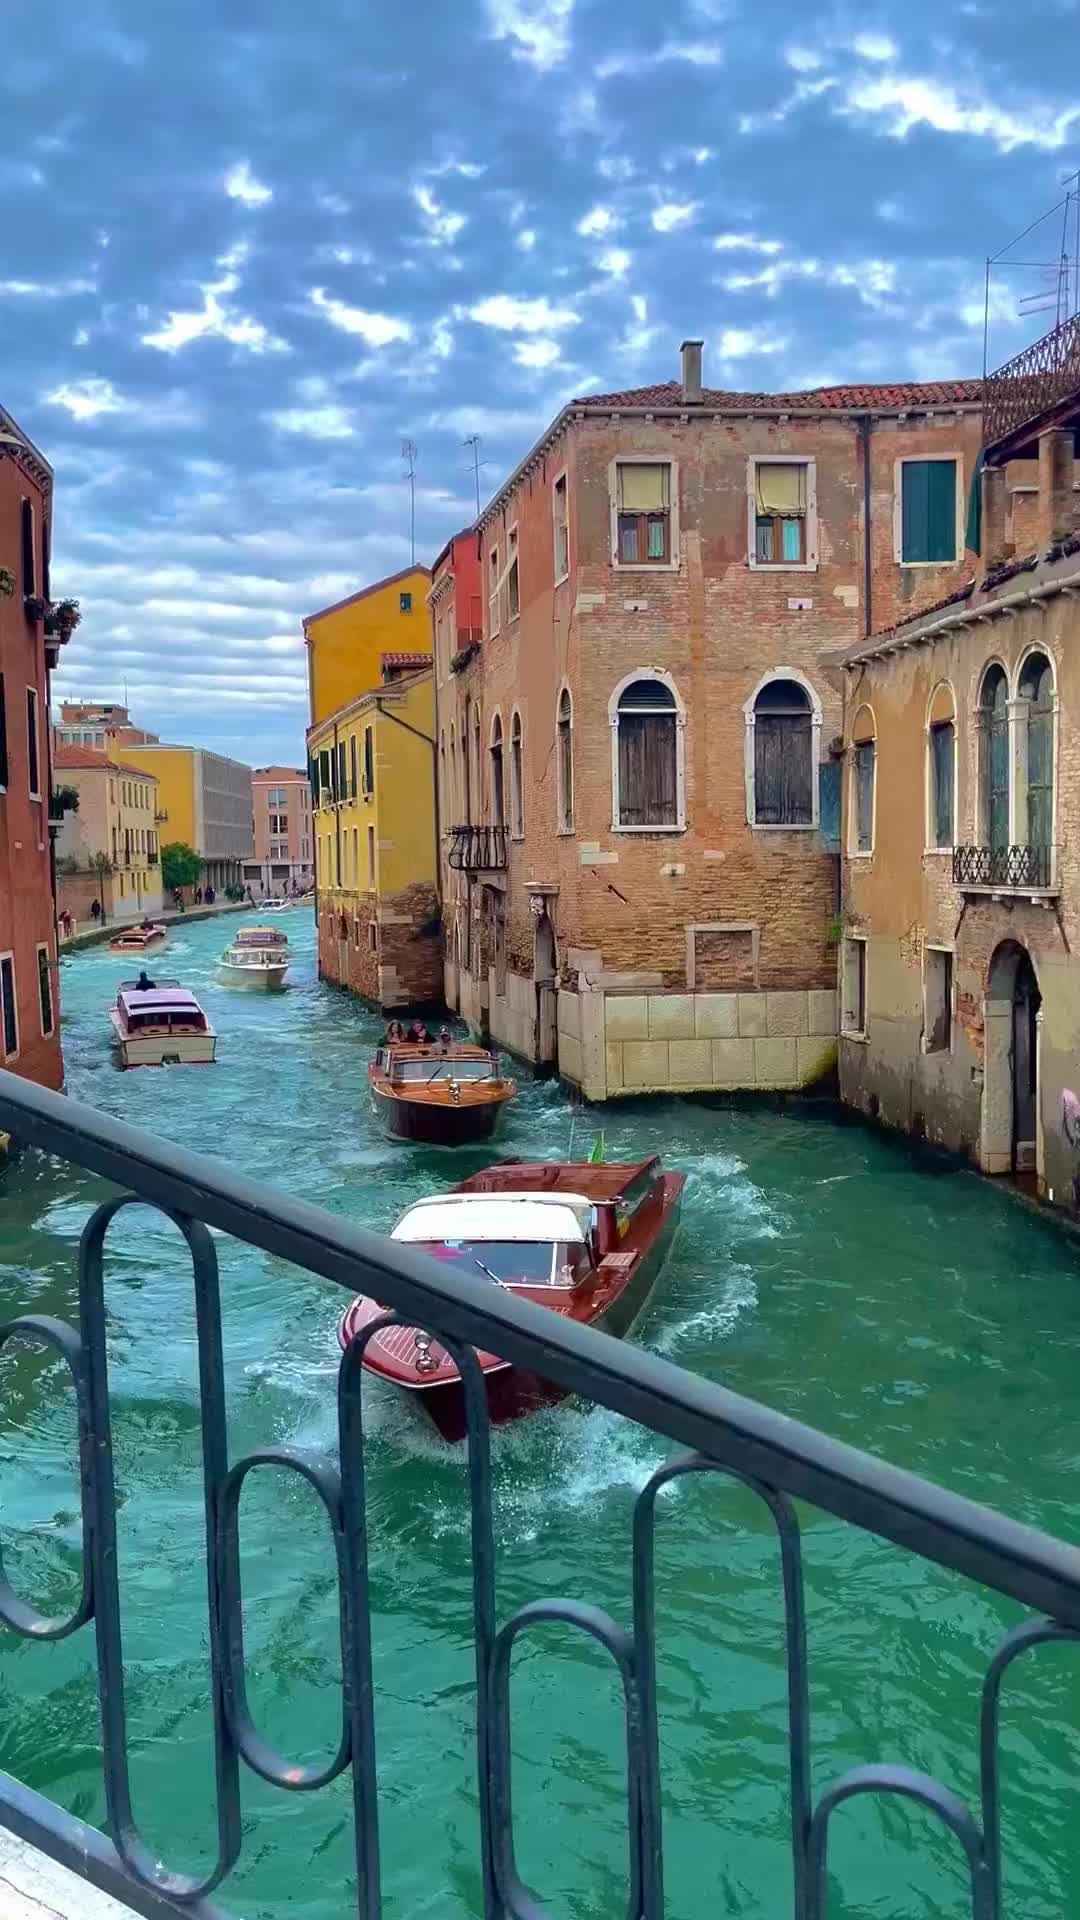 A Day in Venice: Gondolas, Canals, and Charm